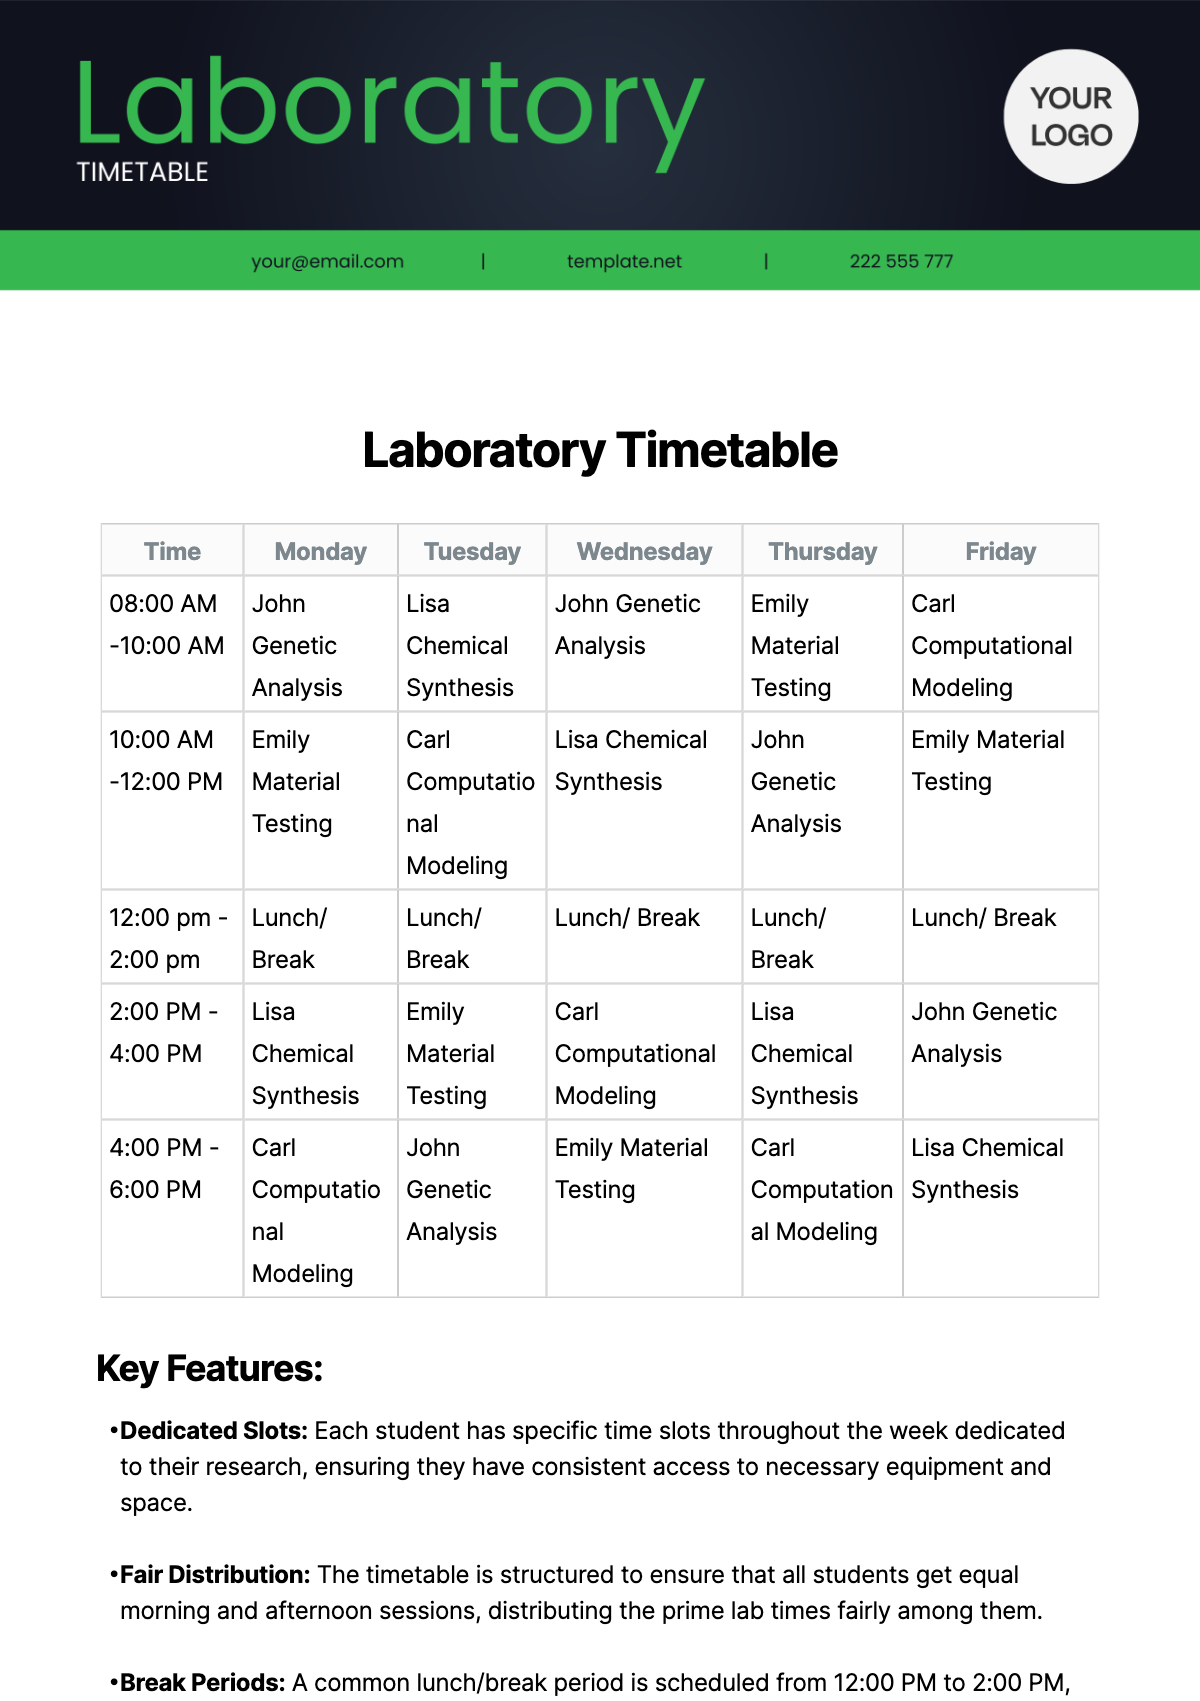 Free Laboratory Timetable Template